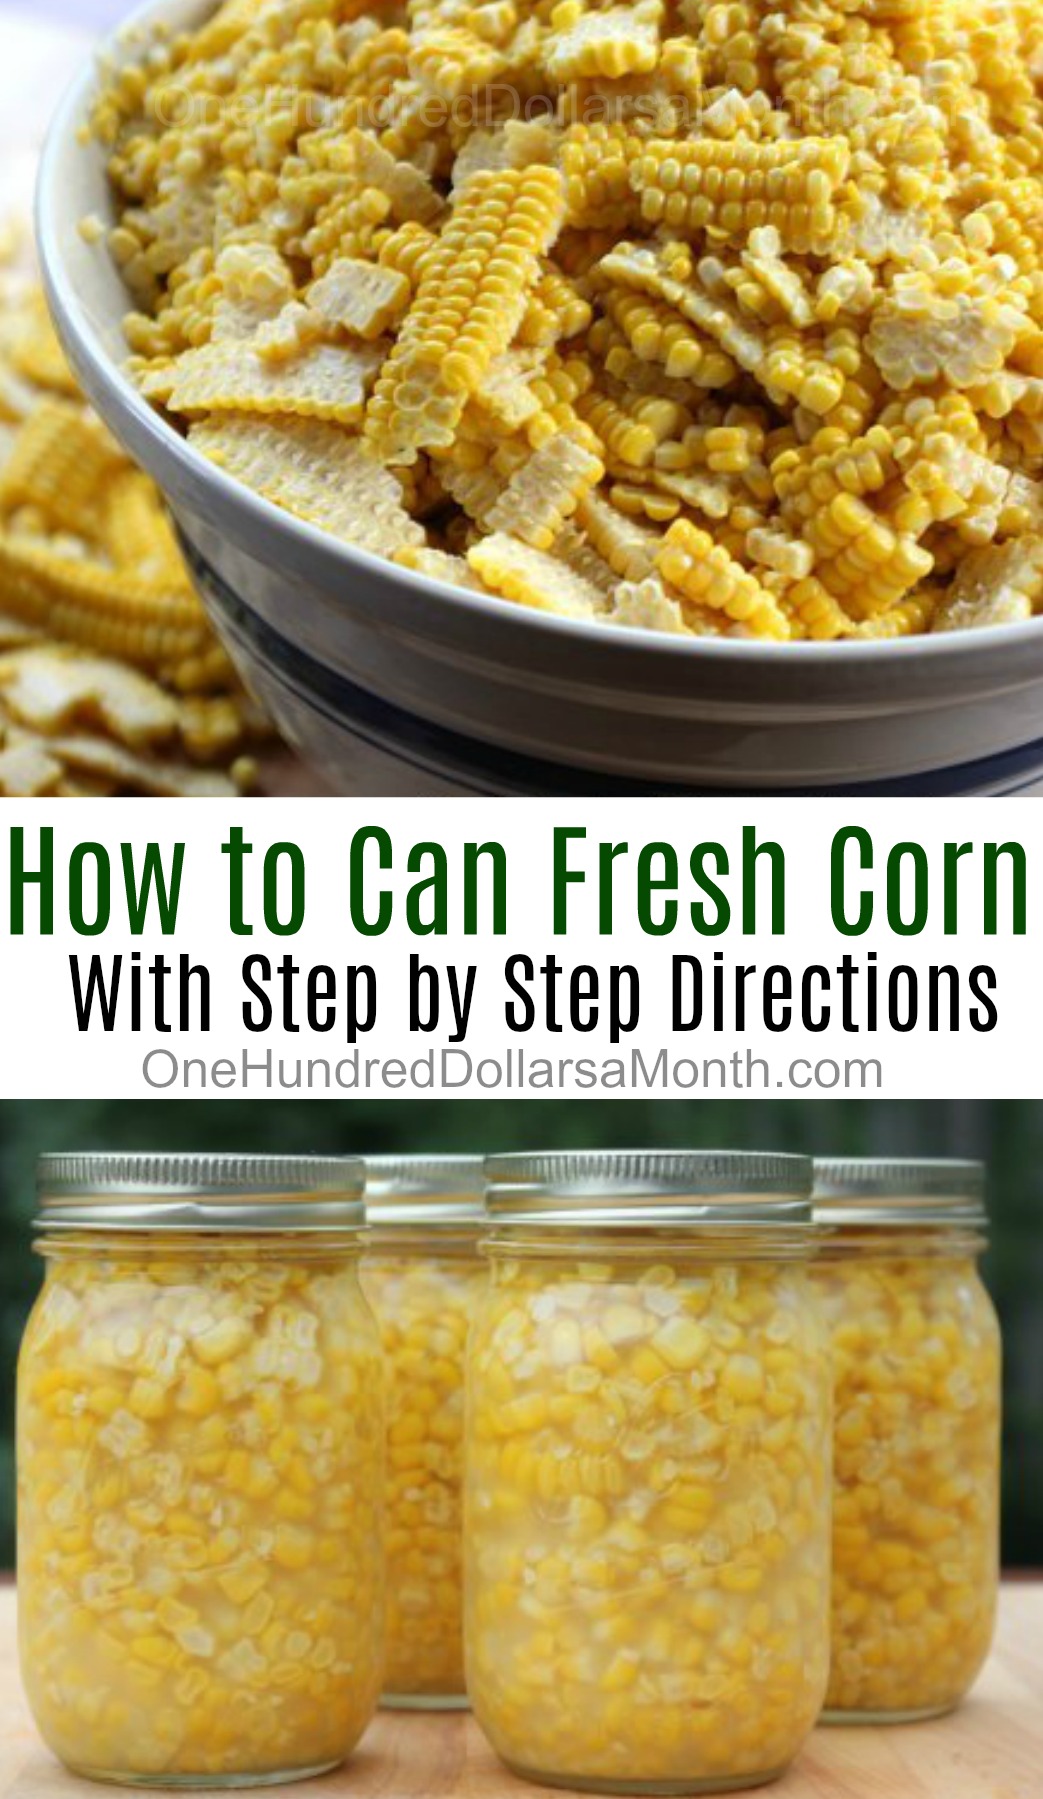 Canning Corn – How to Can Fresh Corn